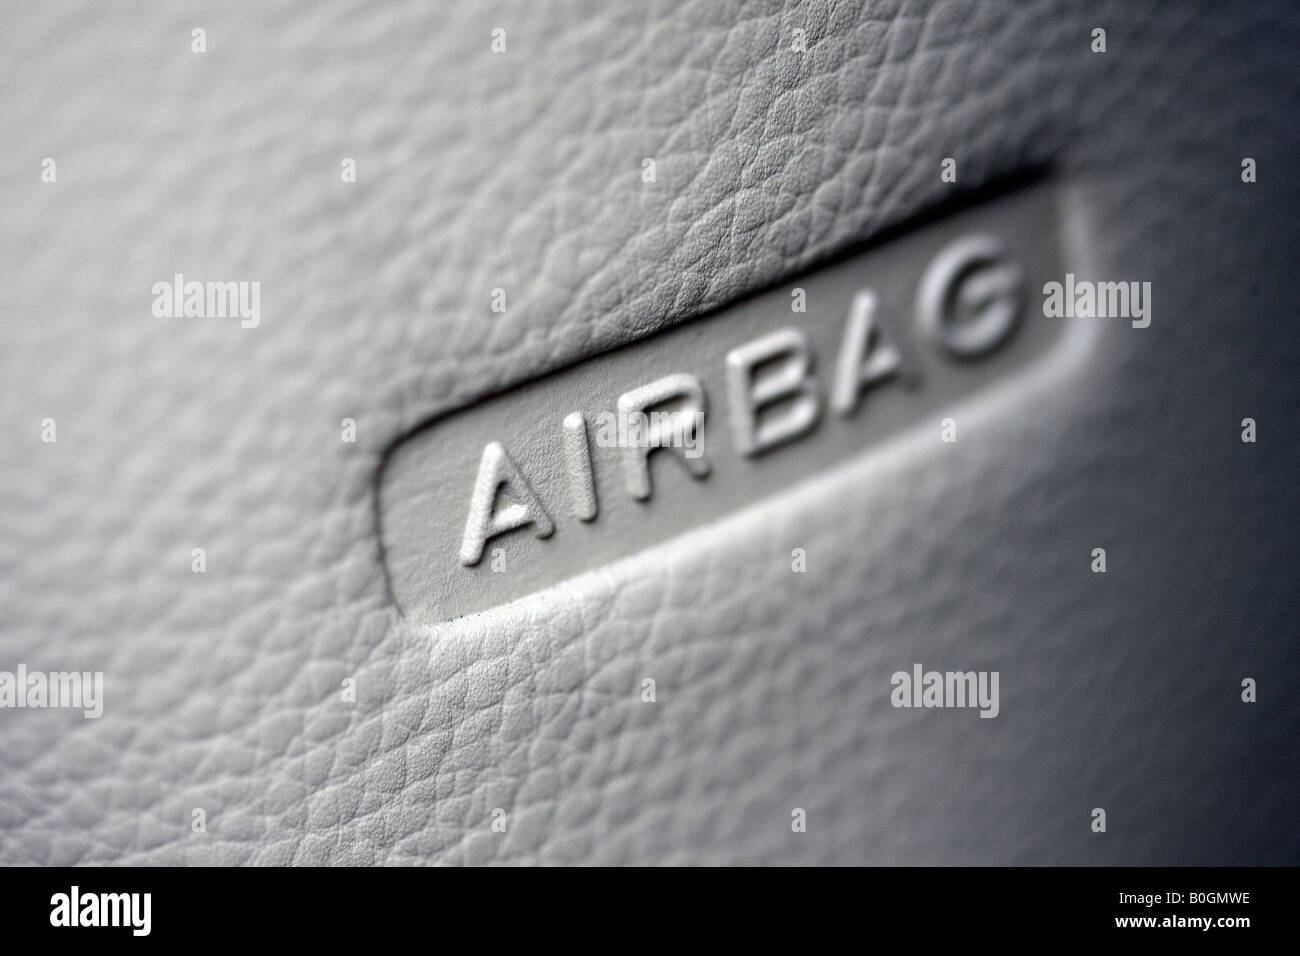 Airbag, safety device, as fitted to most modern cars. Stock Photo